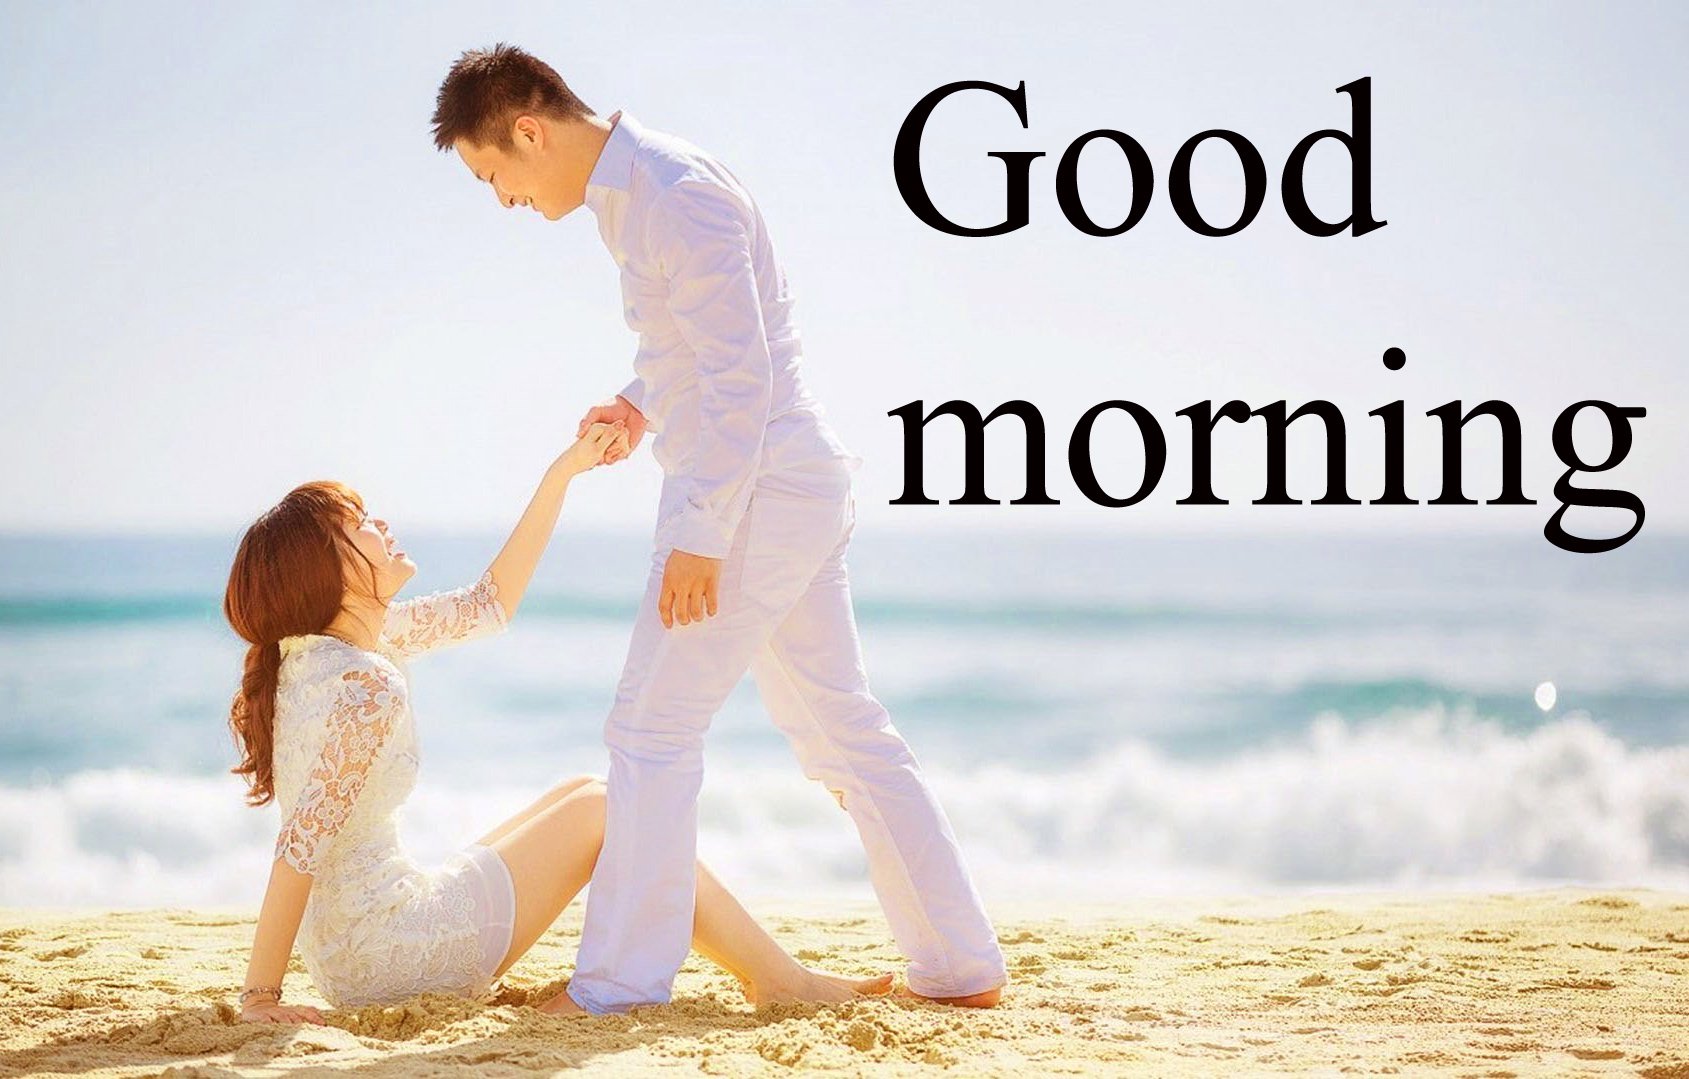 300+ Good Morning Love Images For Romantic Couples, Bf-gf